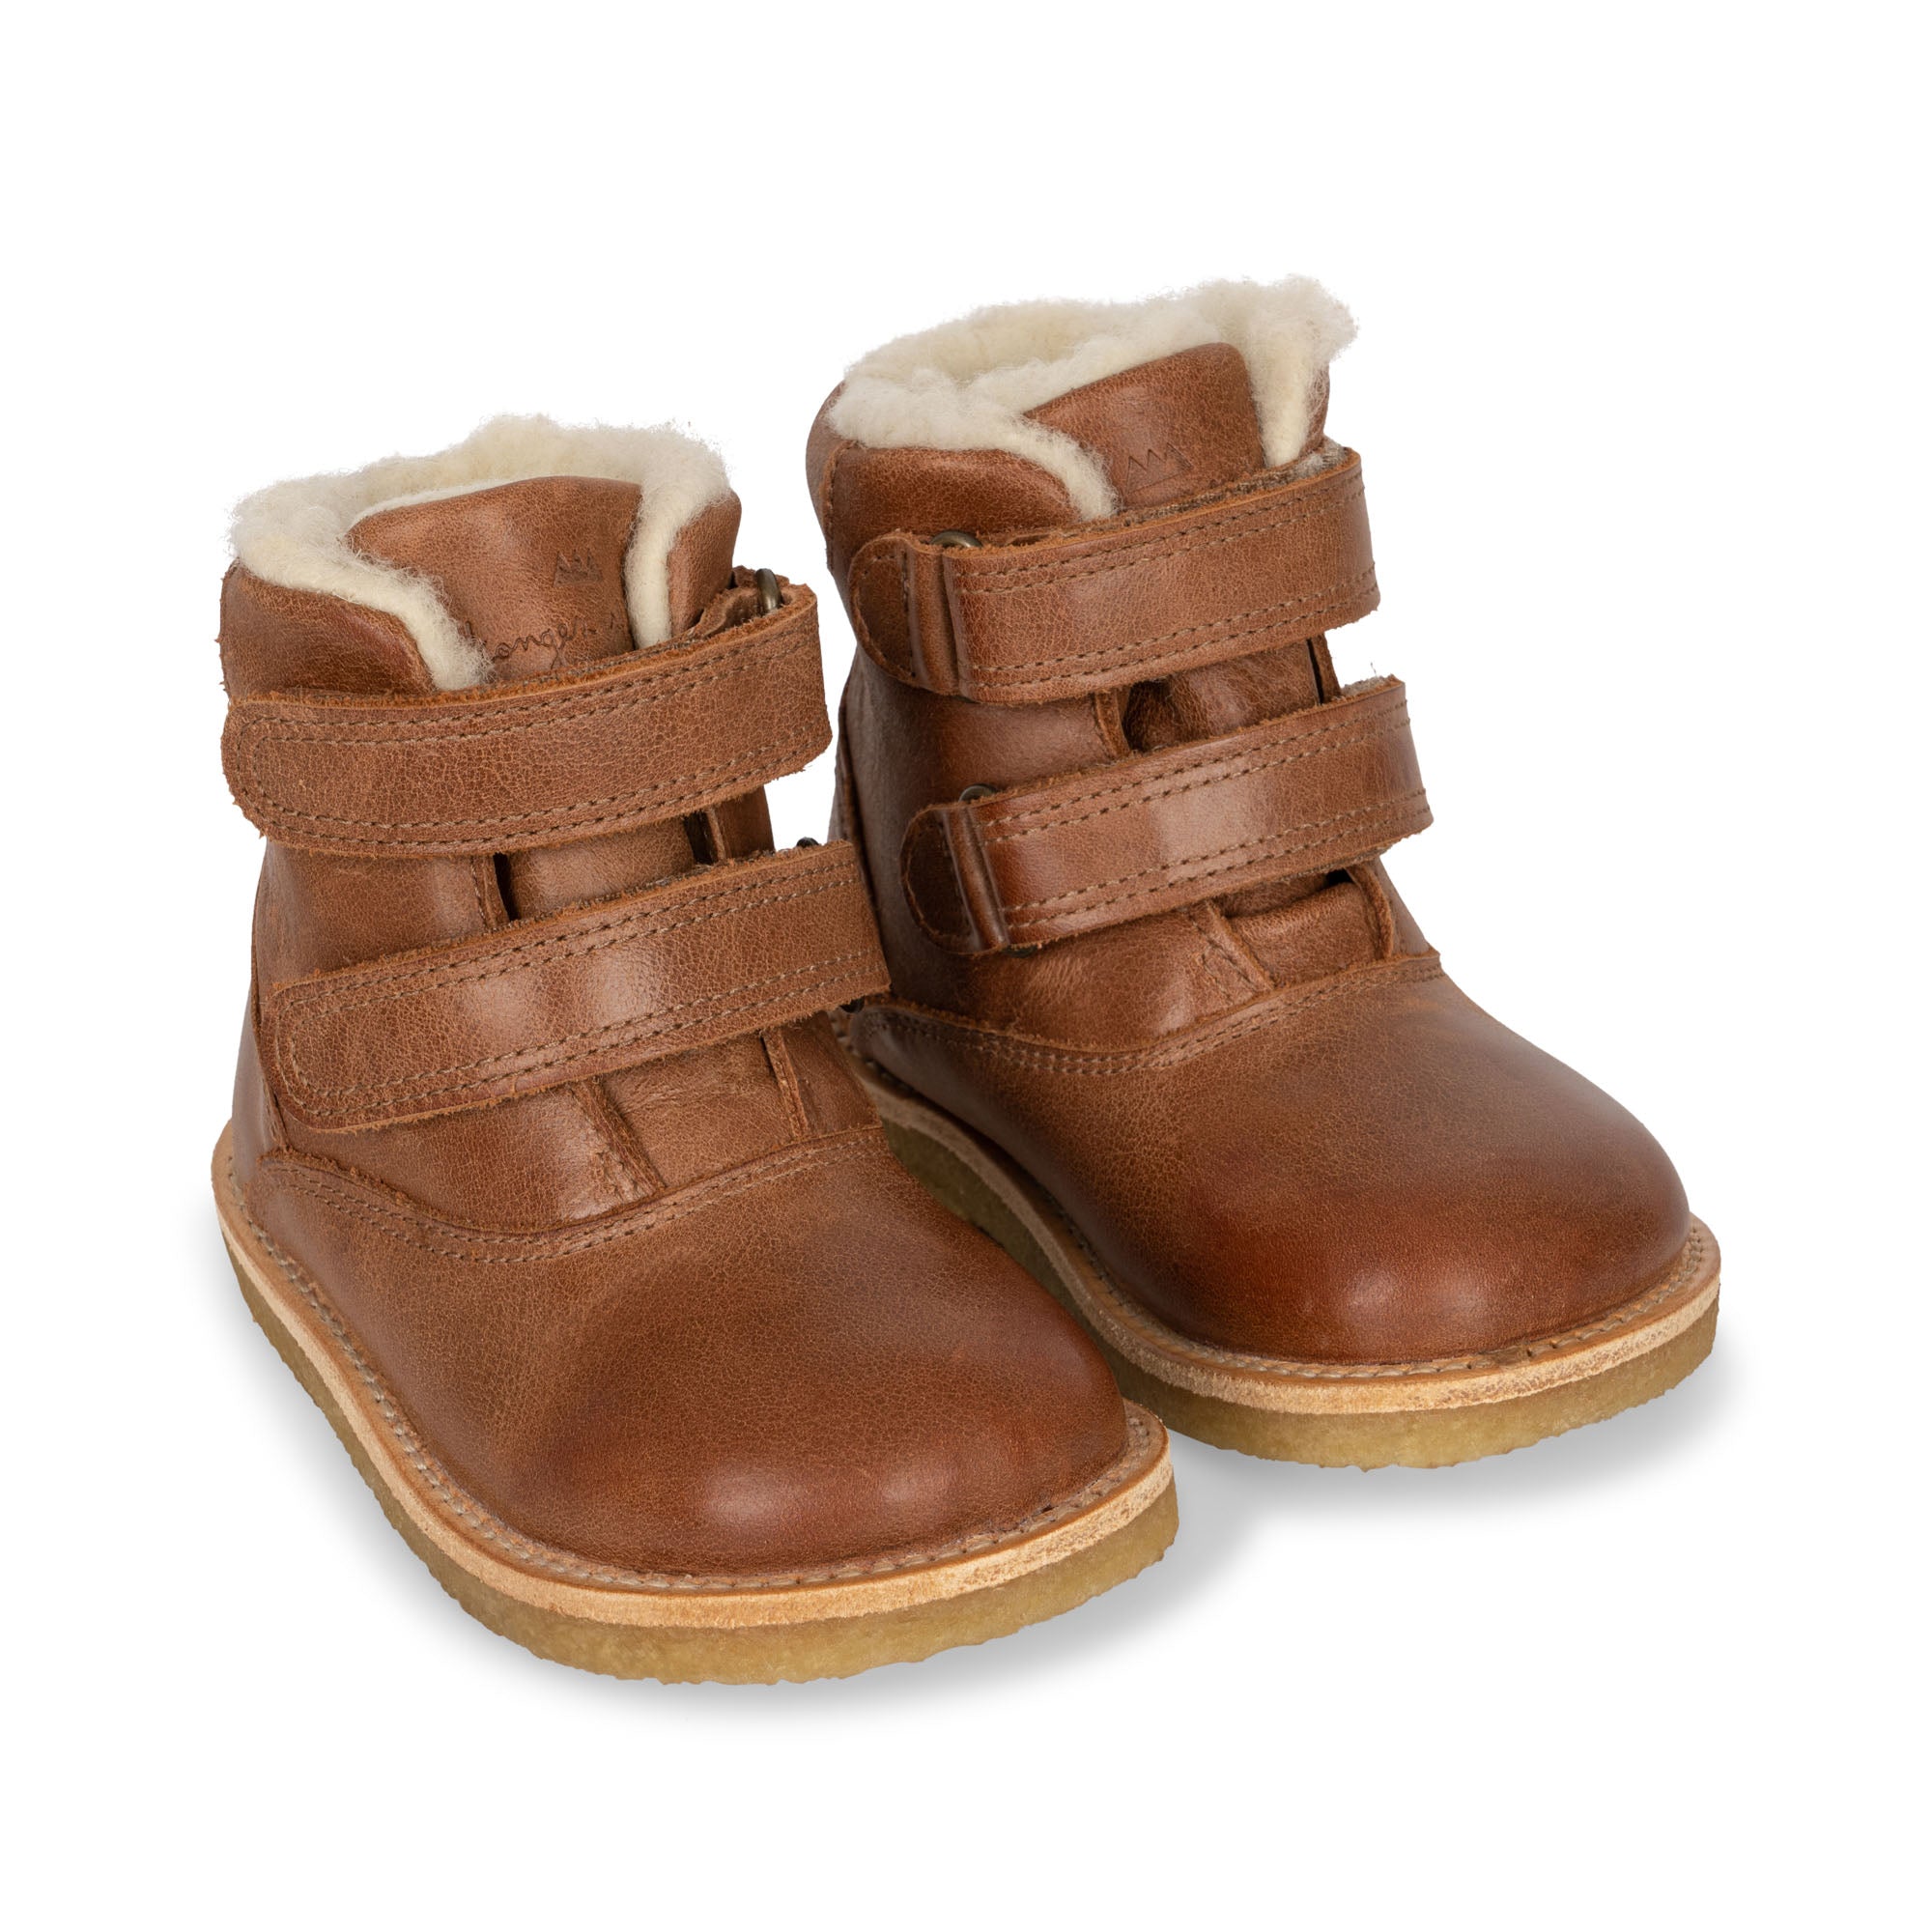 Konges Sløjd A/S WINTERLY BOOTS Leather boots COGNAC